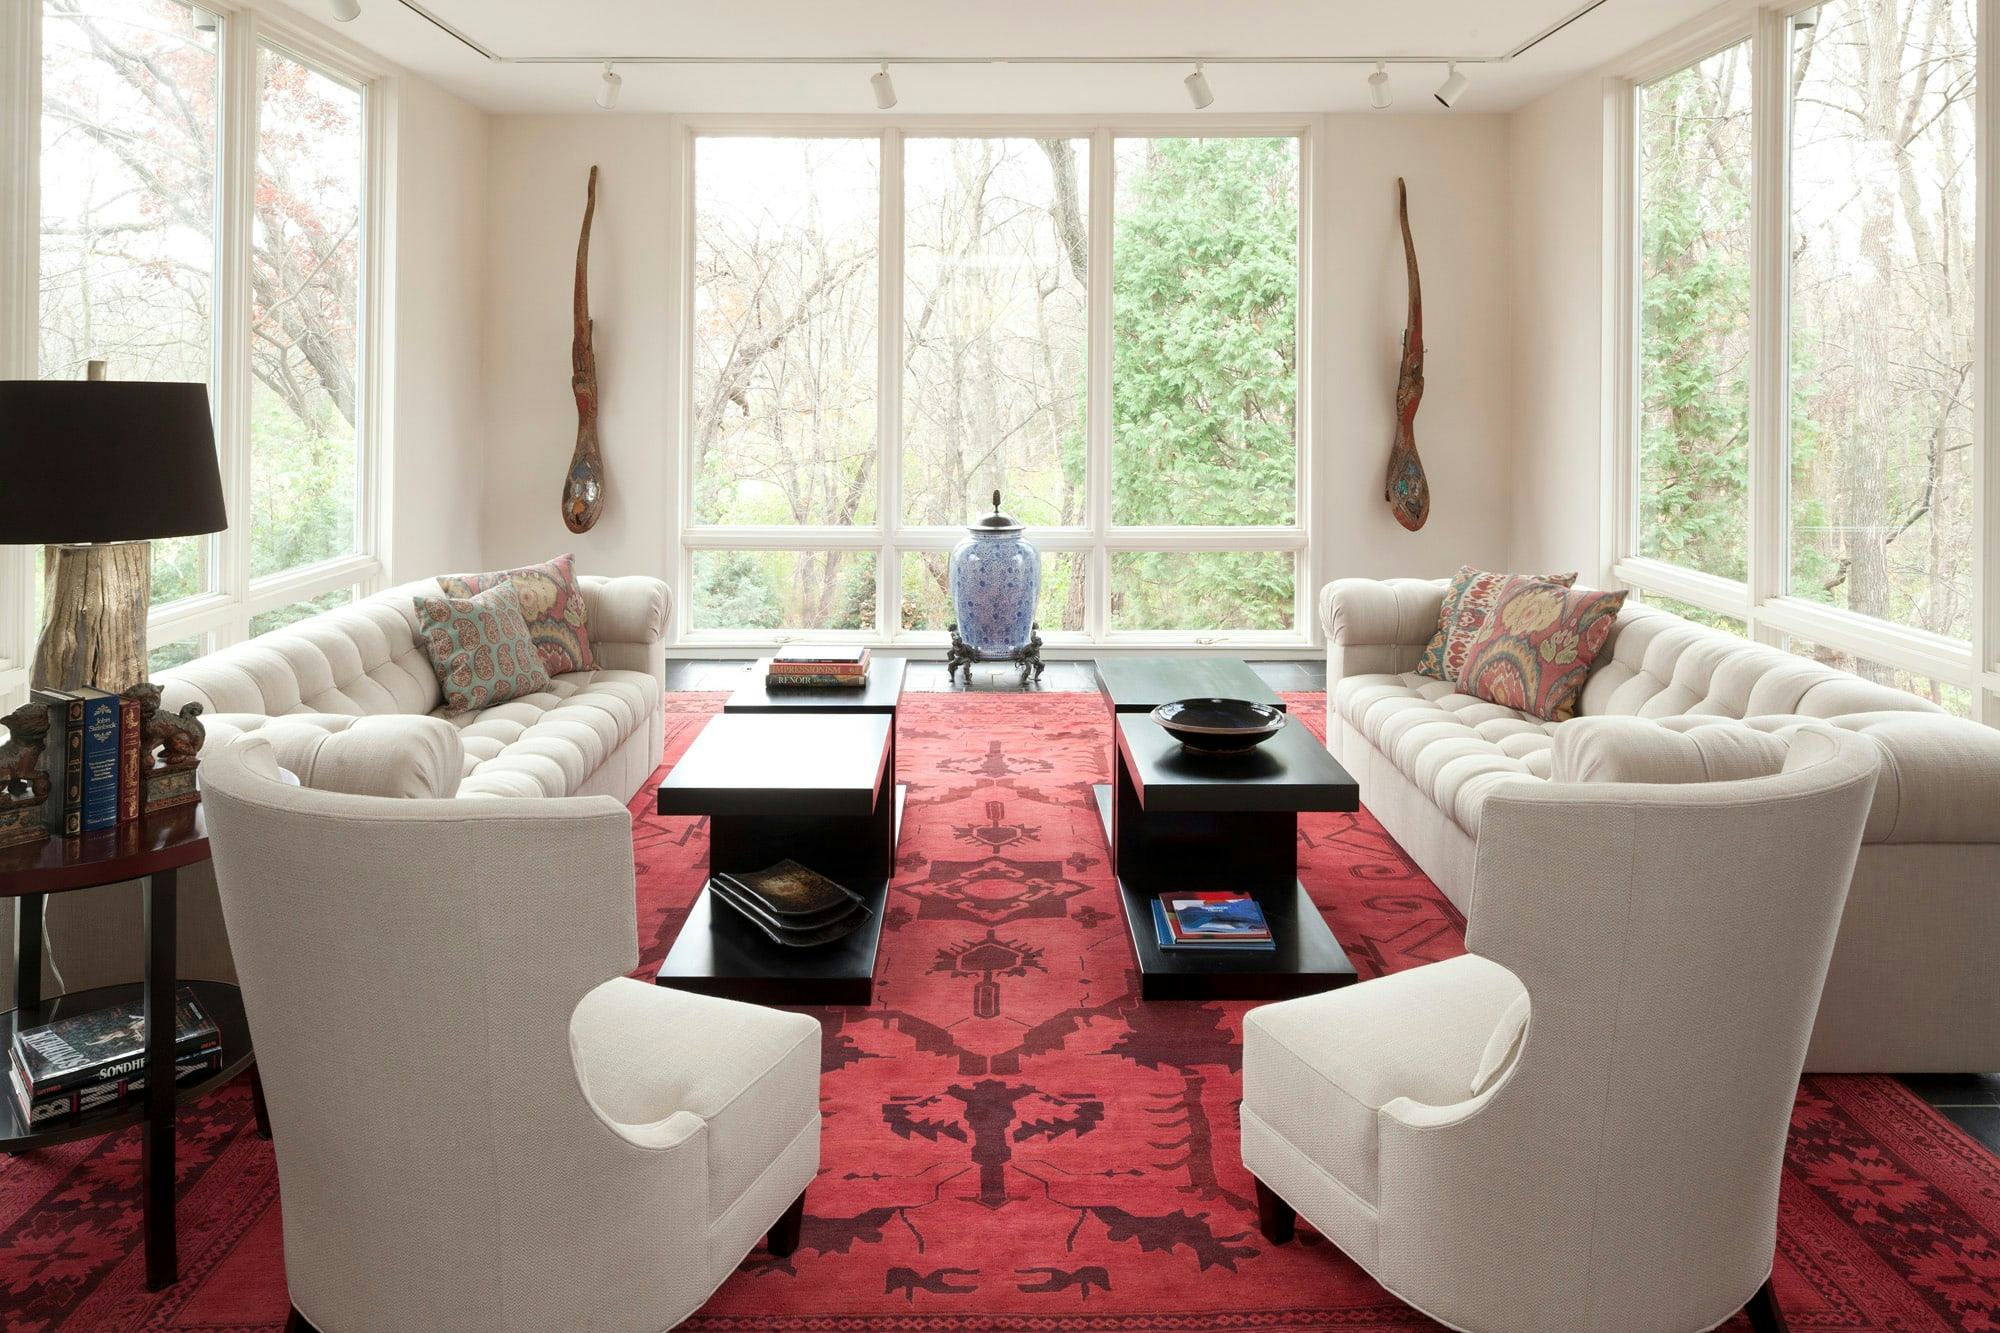 bright living space to entertain, large windows, two couches, chairs, red rug